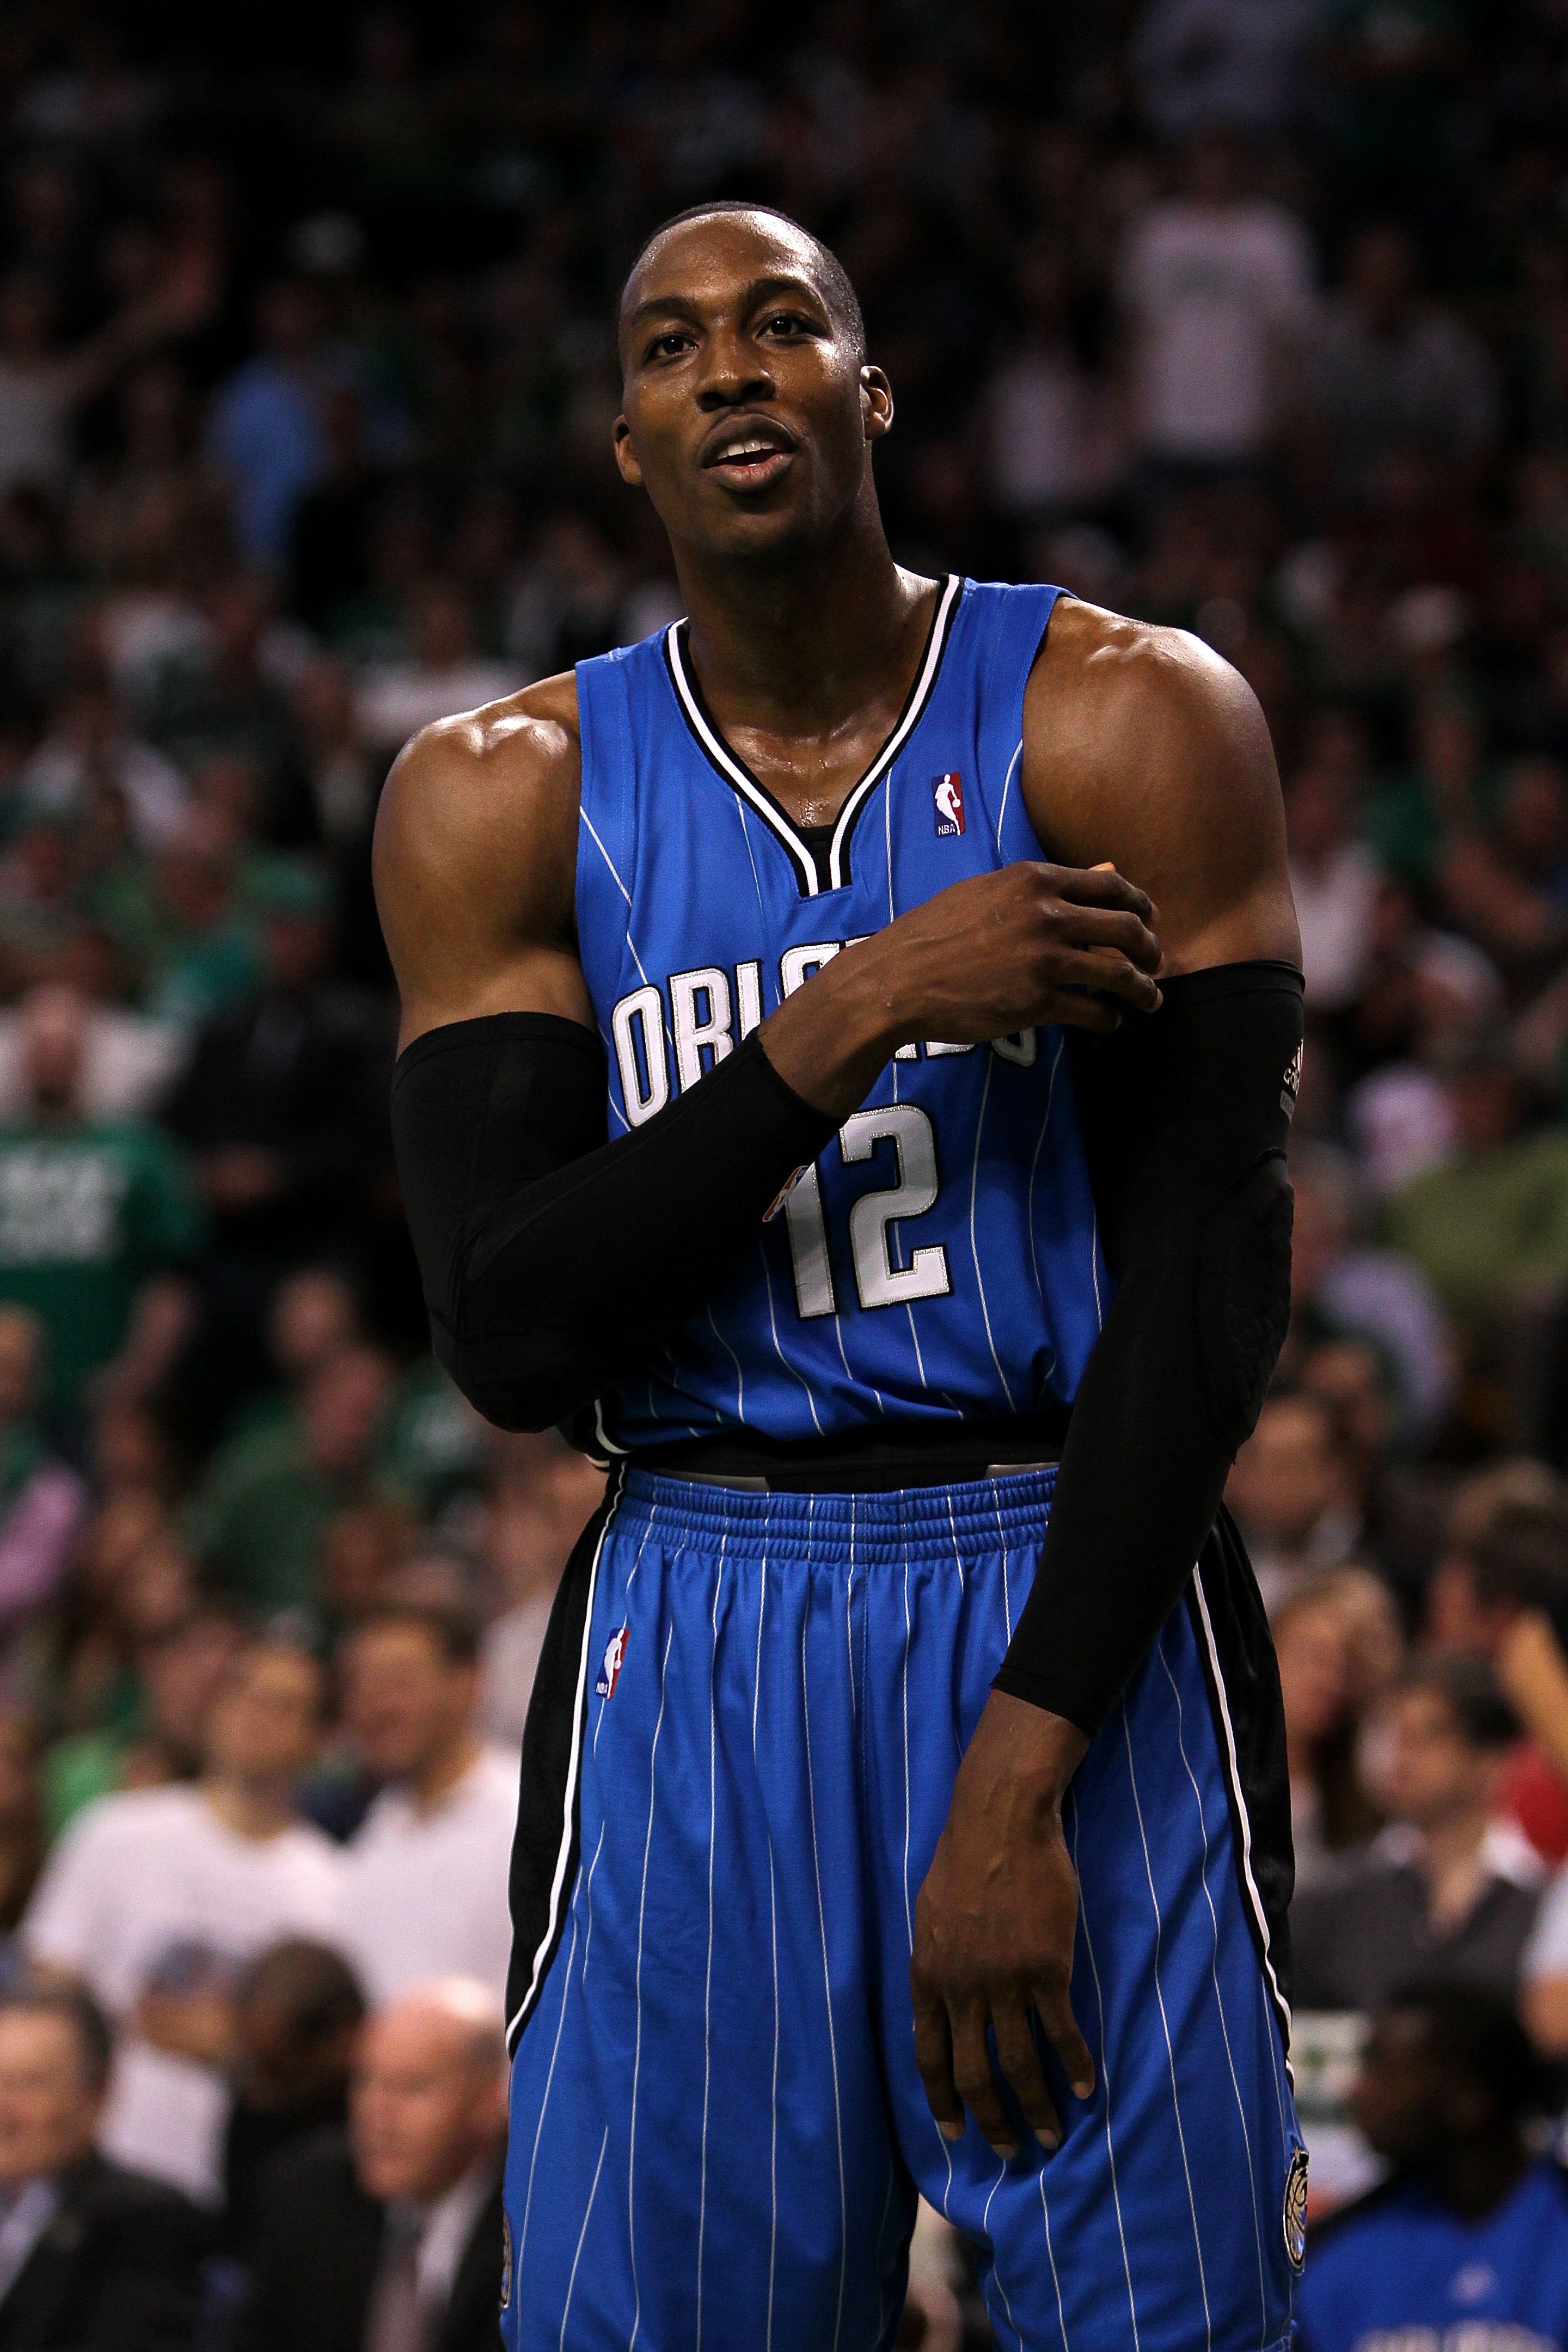 The Top 10 Orlando Magic Players of All Time, Ranked By a Miami